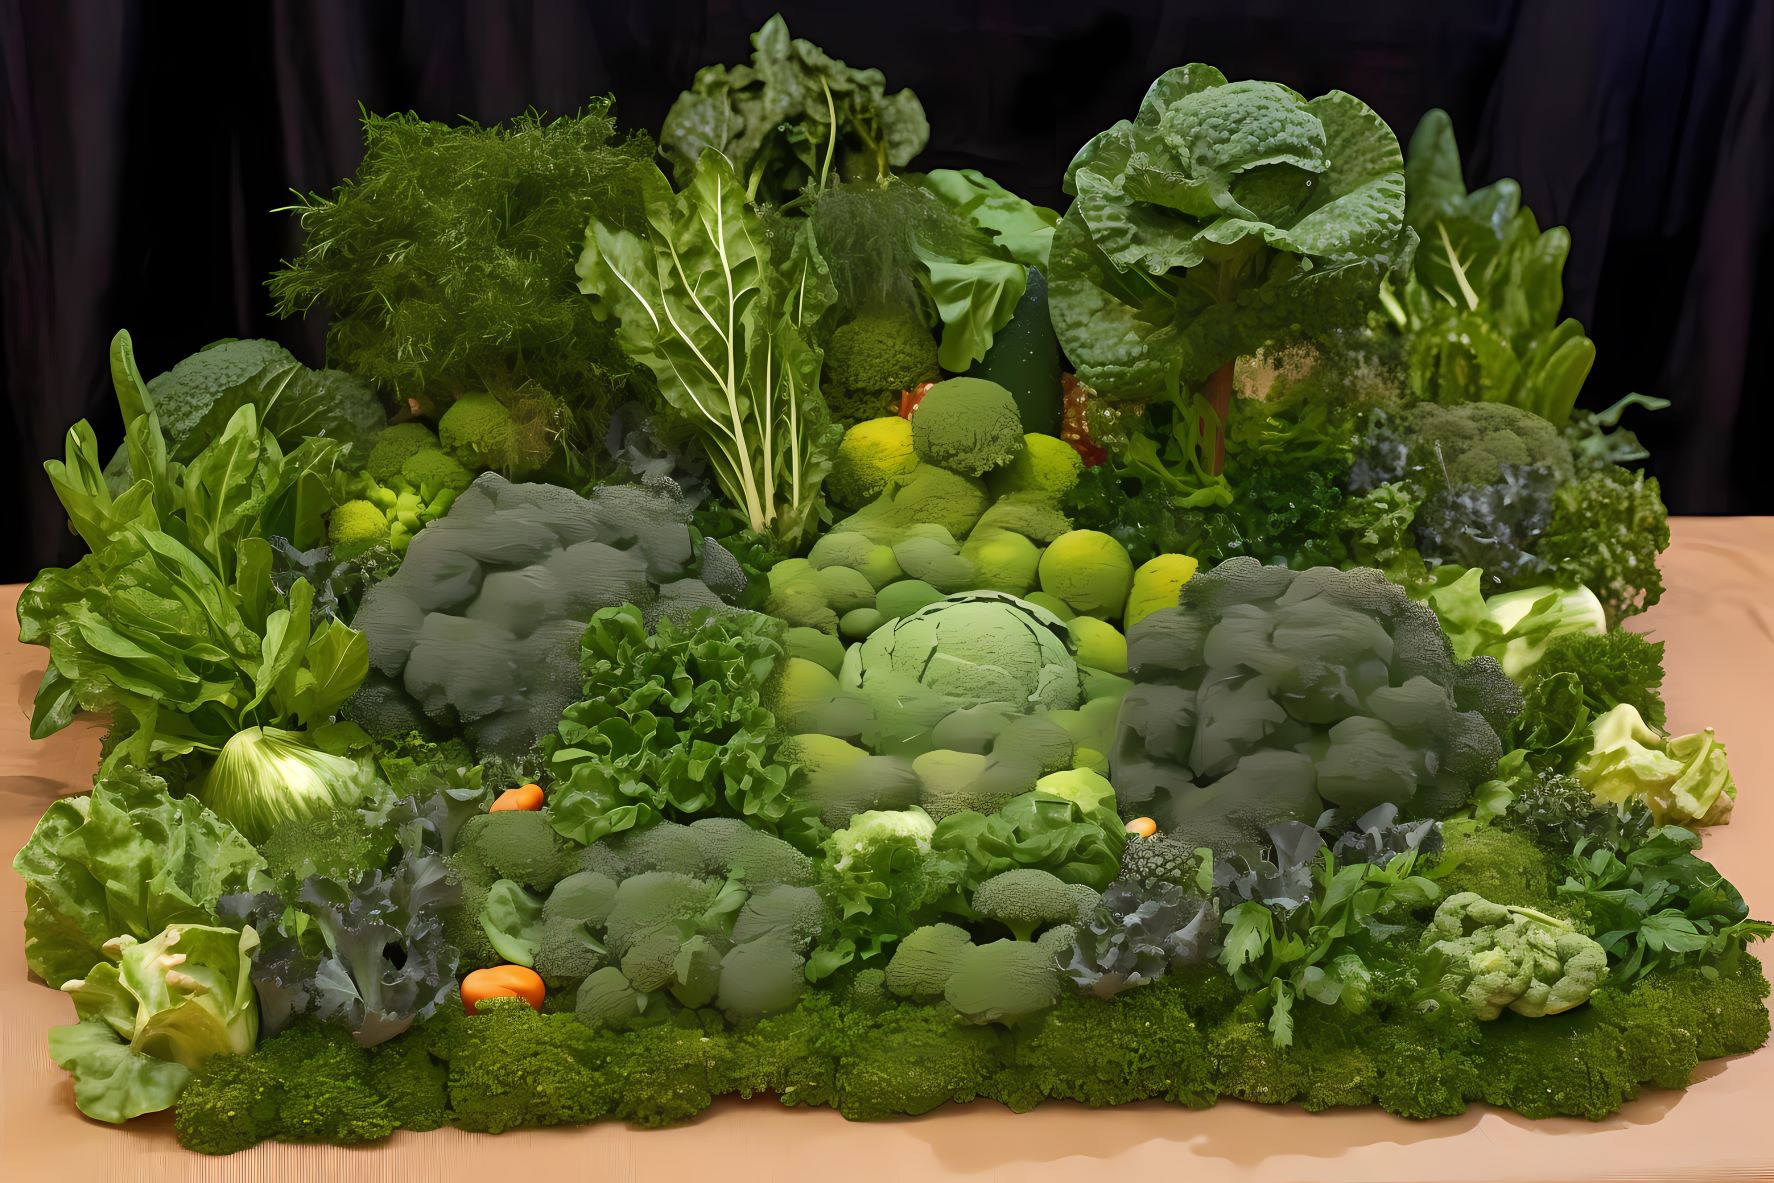 Green vegetables are a nutritional powerhouse